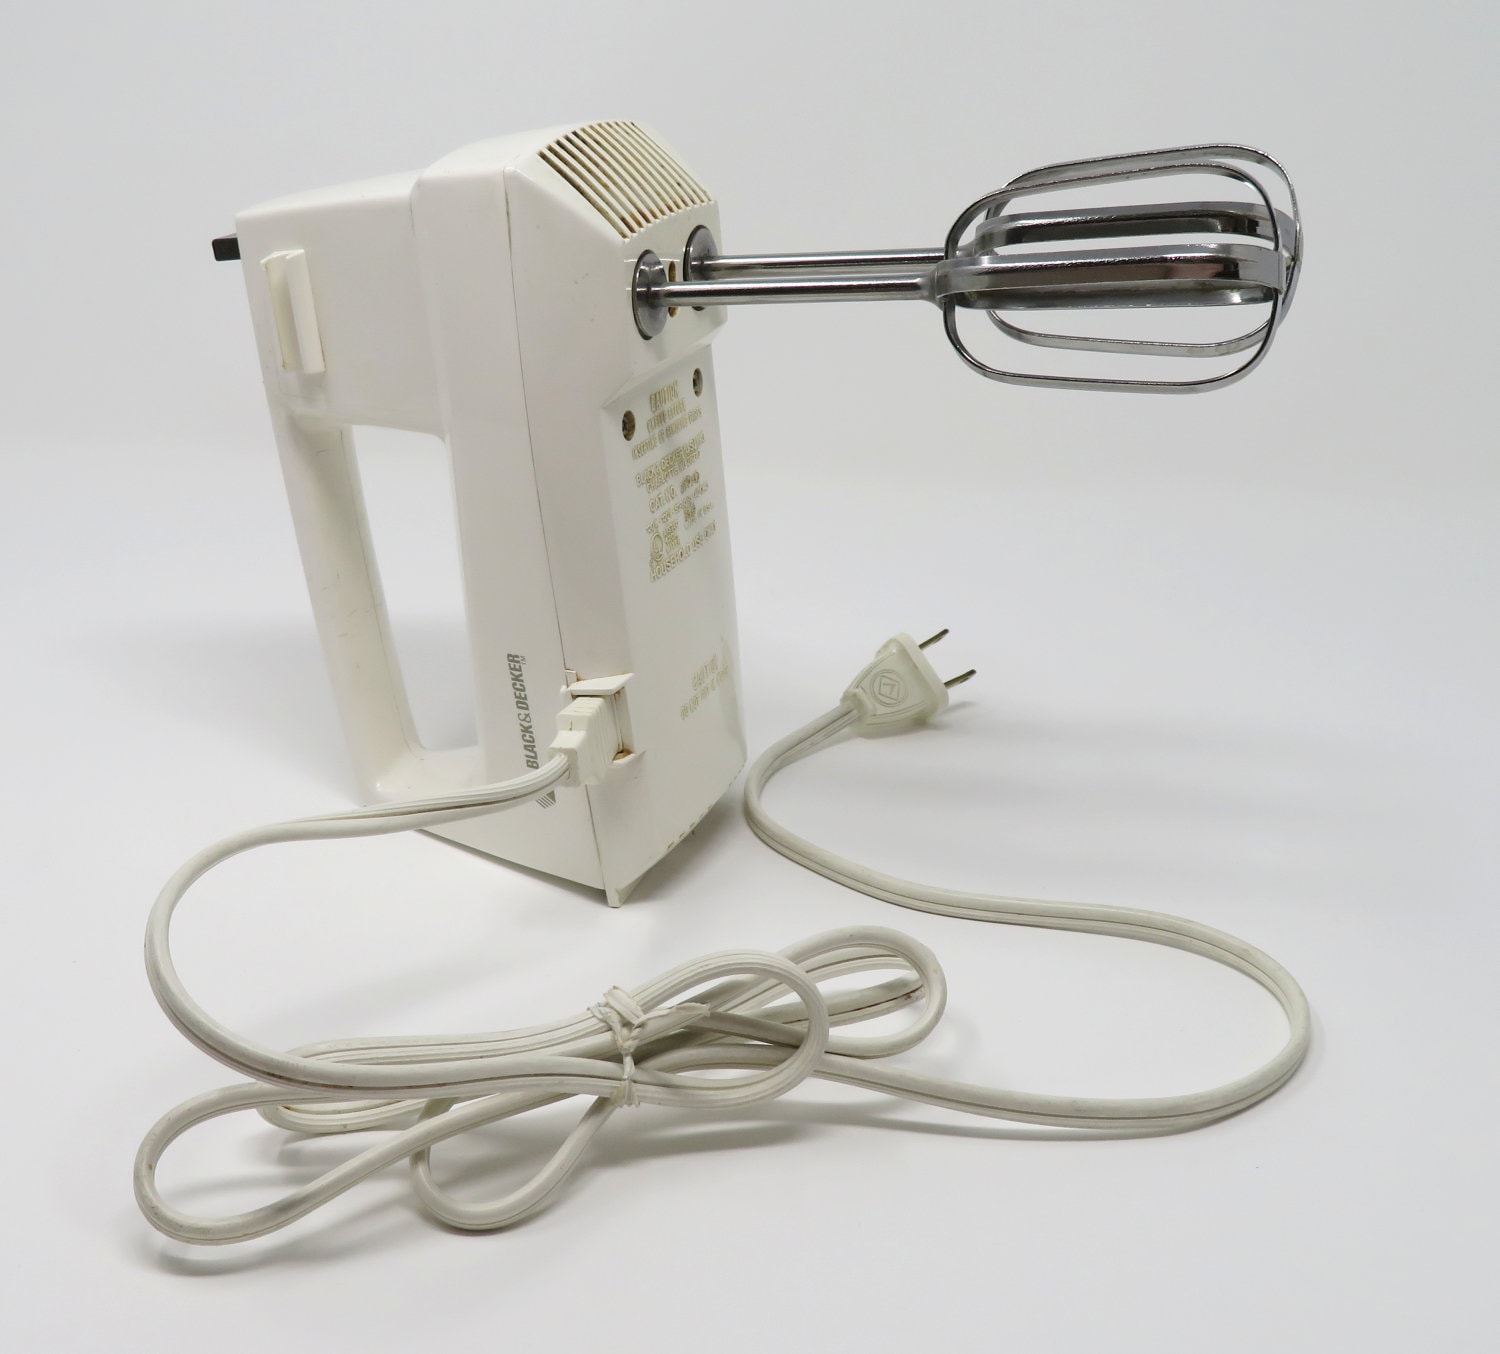 Vintage Black & Decker Multiple Speed Portable Hand Mixer - Tested